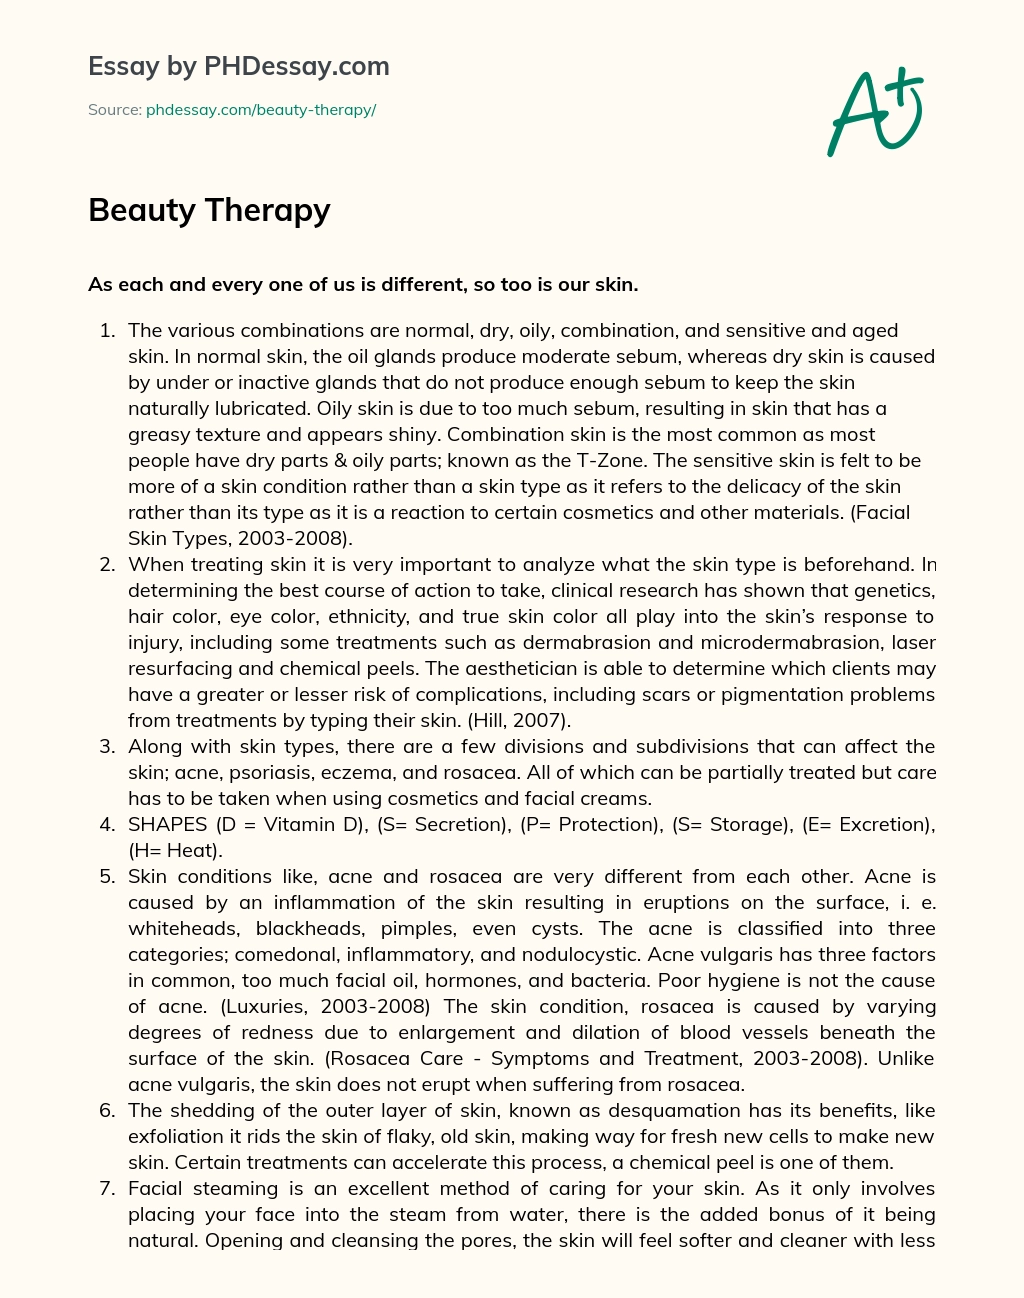 Beauty Therapy essay